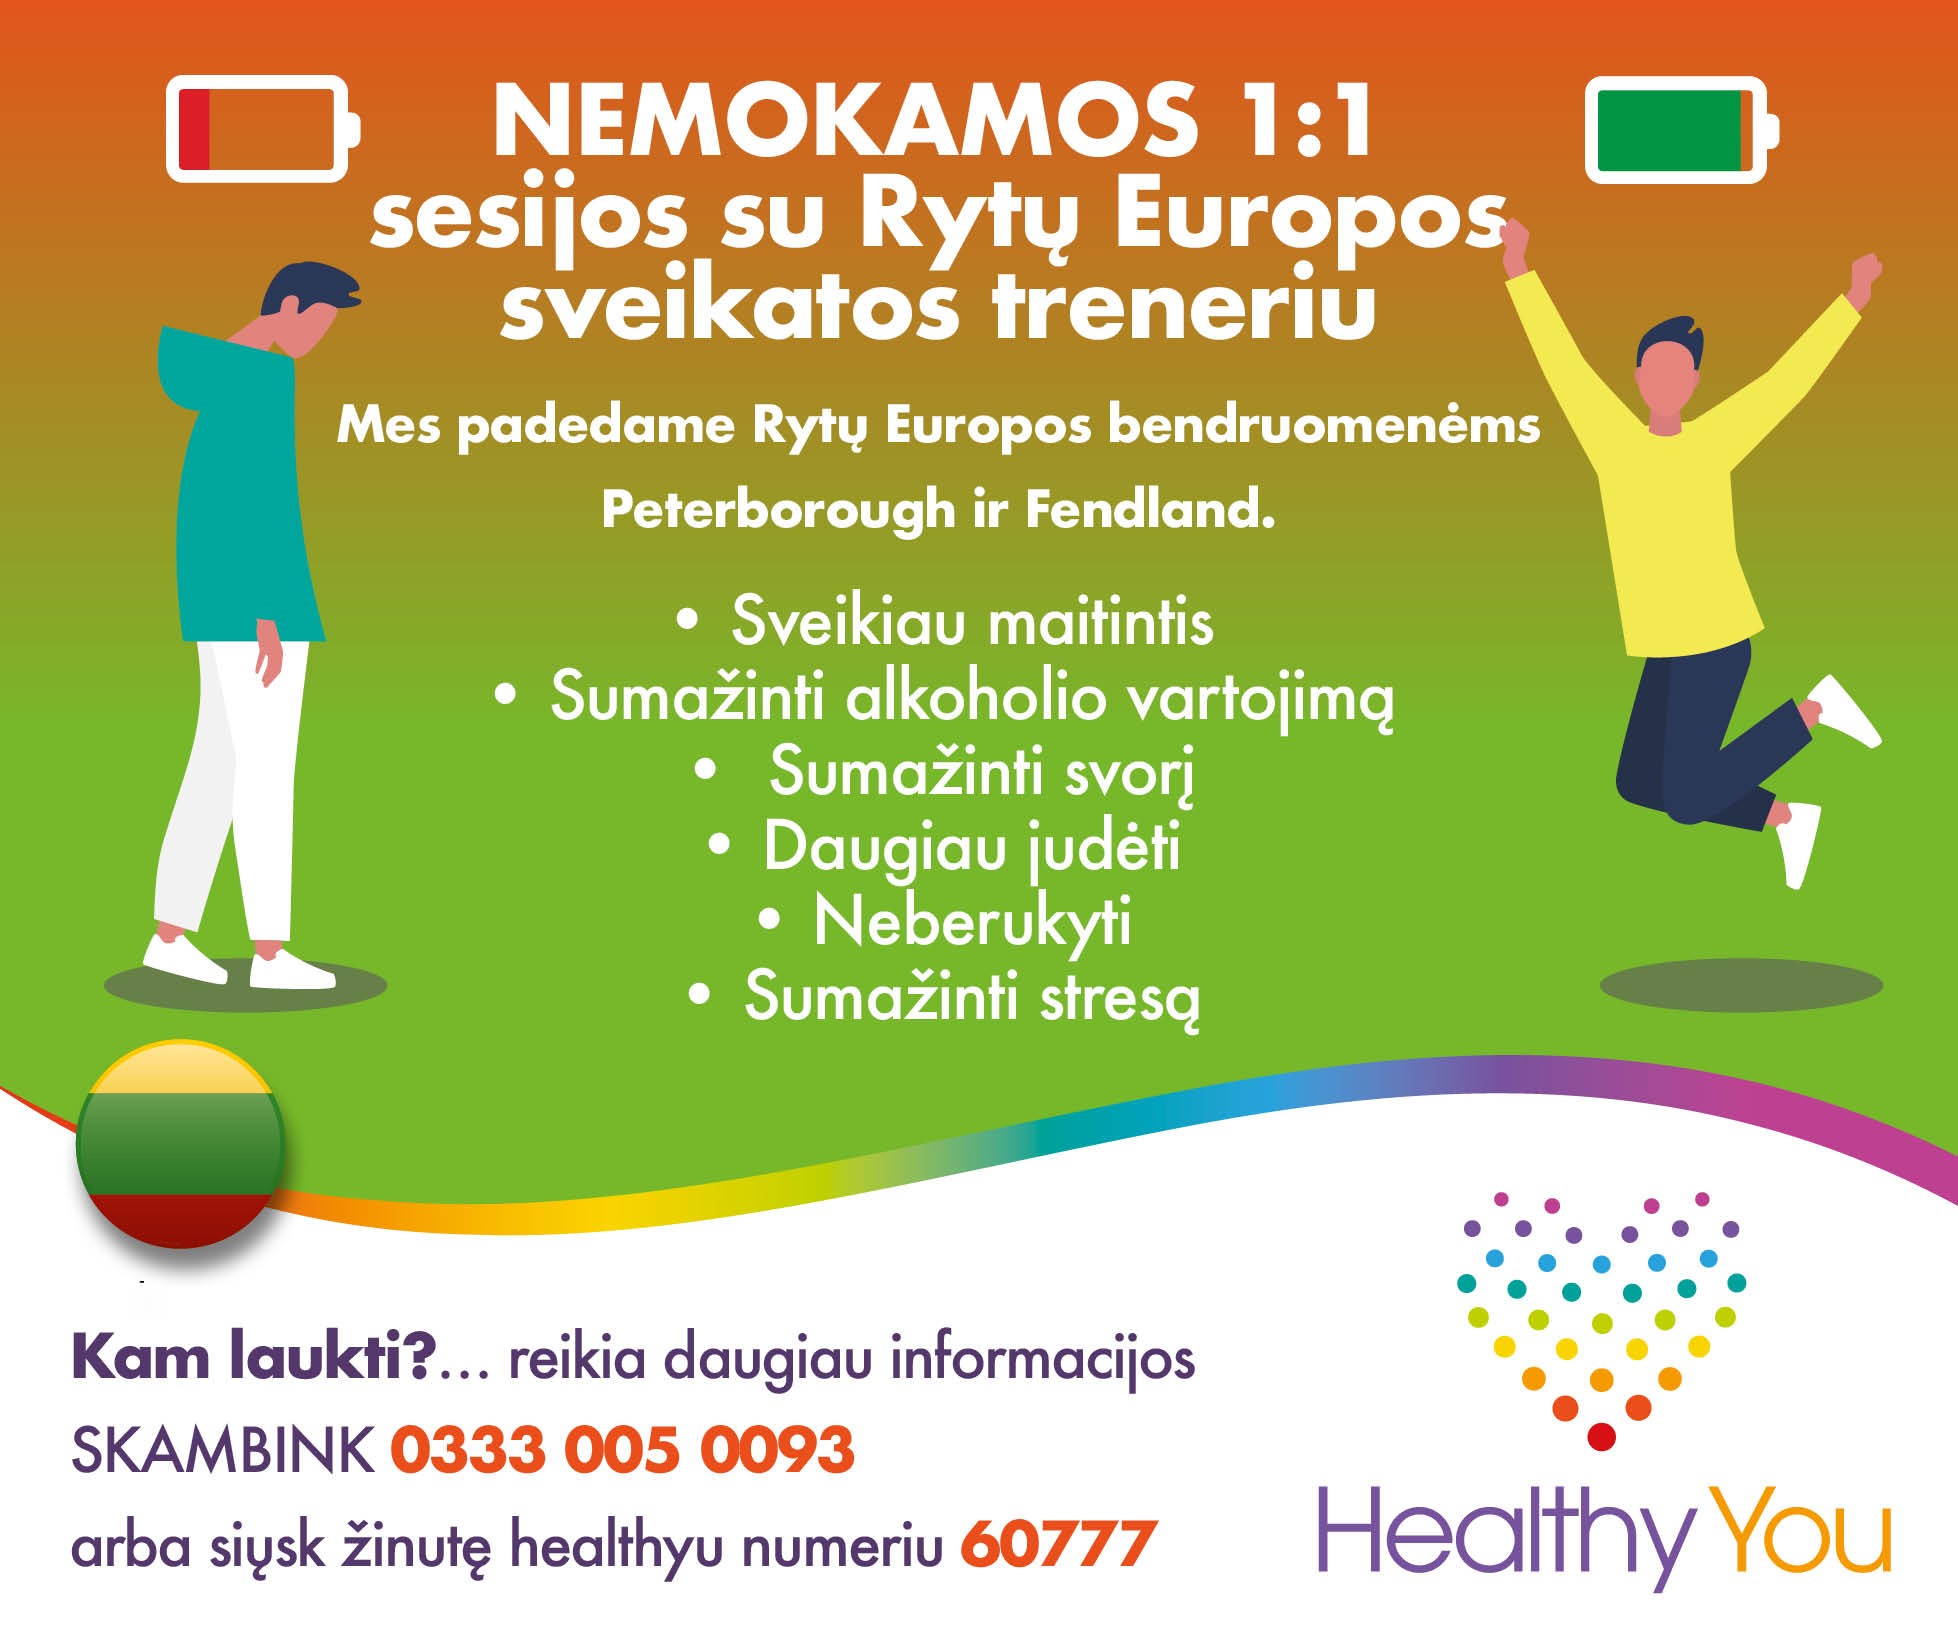 Healthy You poster